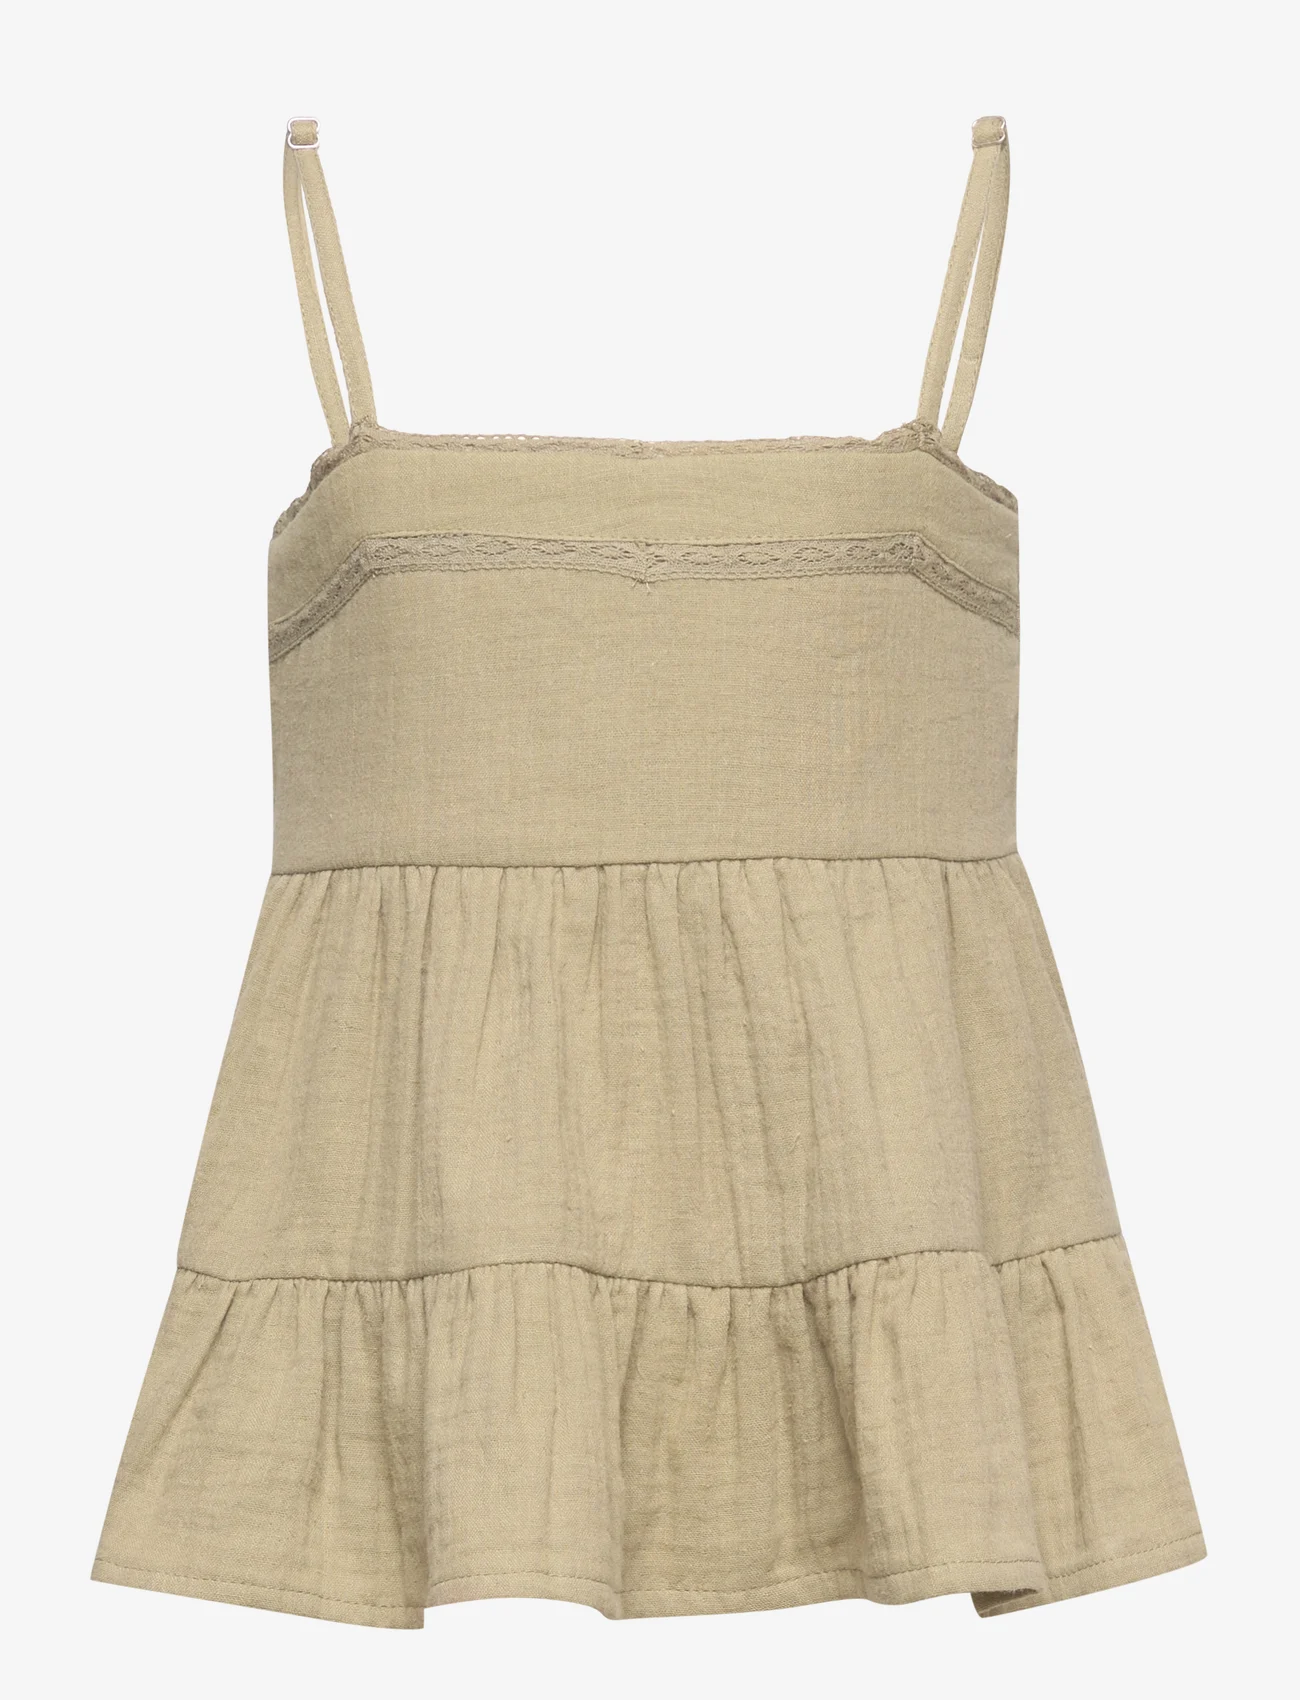 Sofie Schnoor Baby and Kids - Top - sommarfynd - dusty green - 0